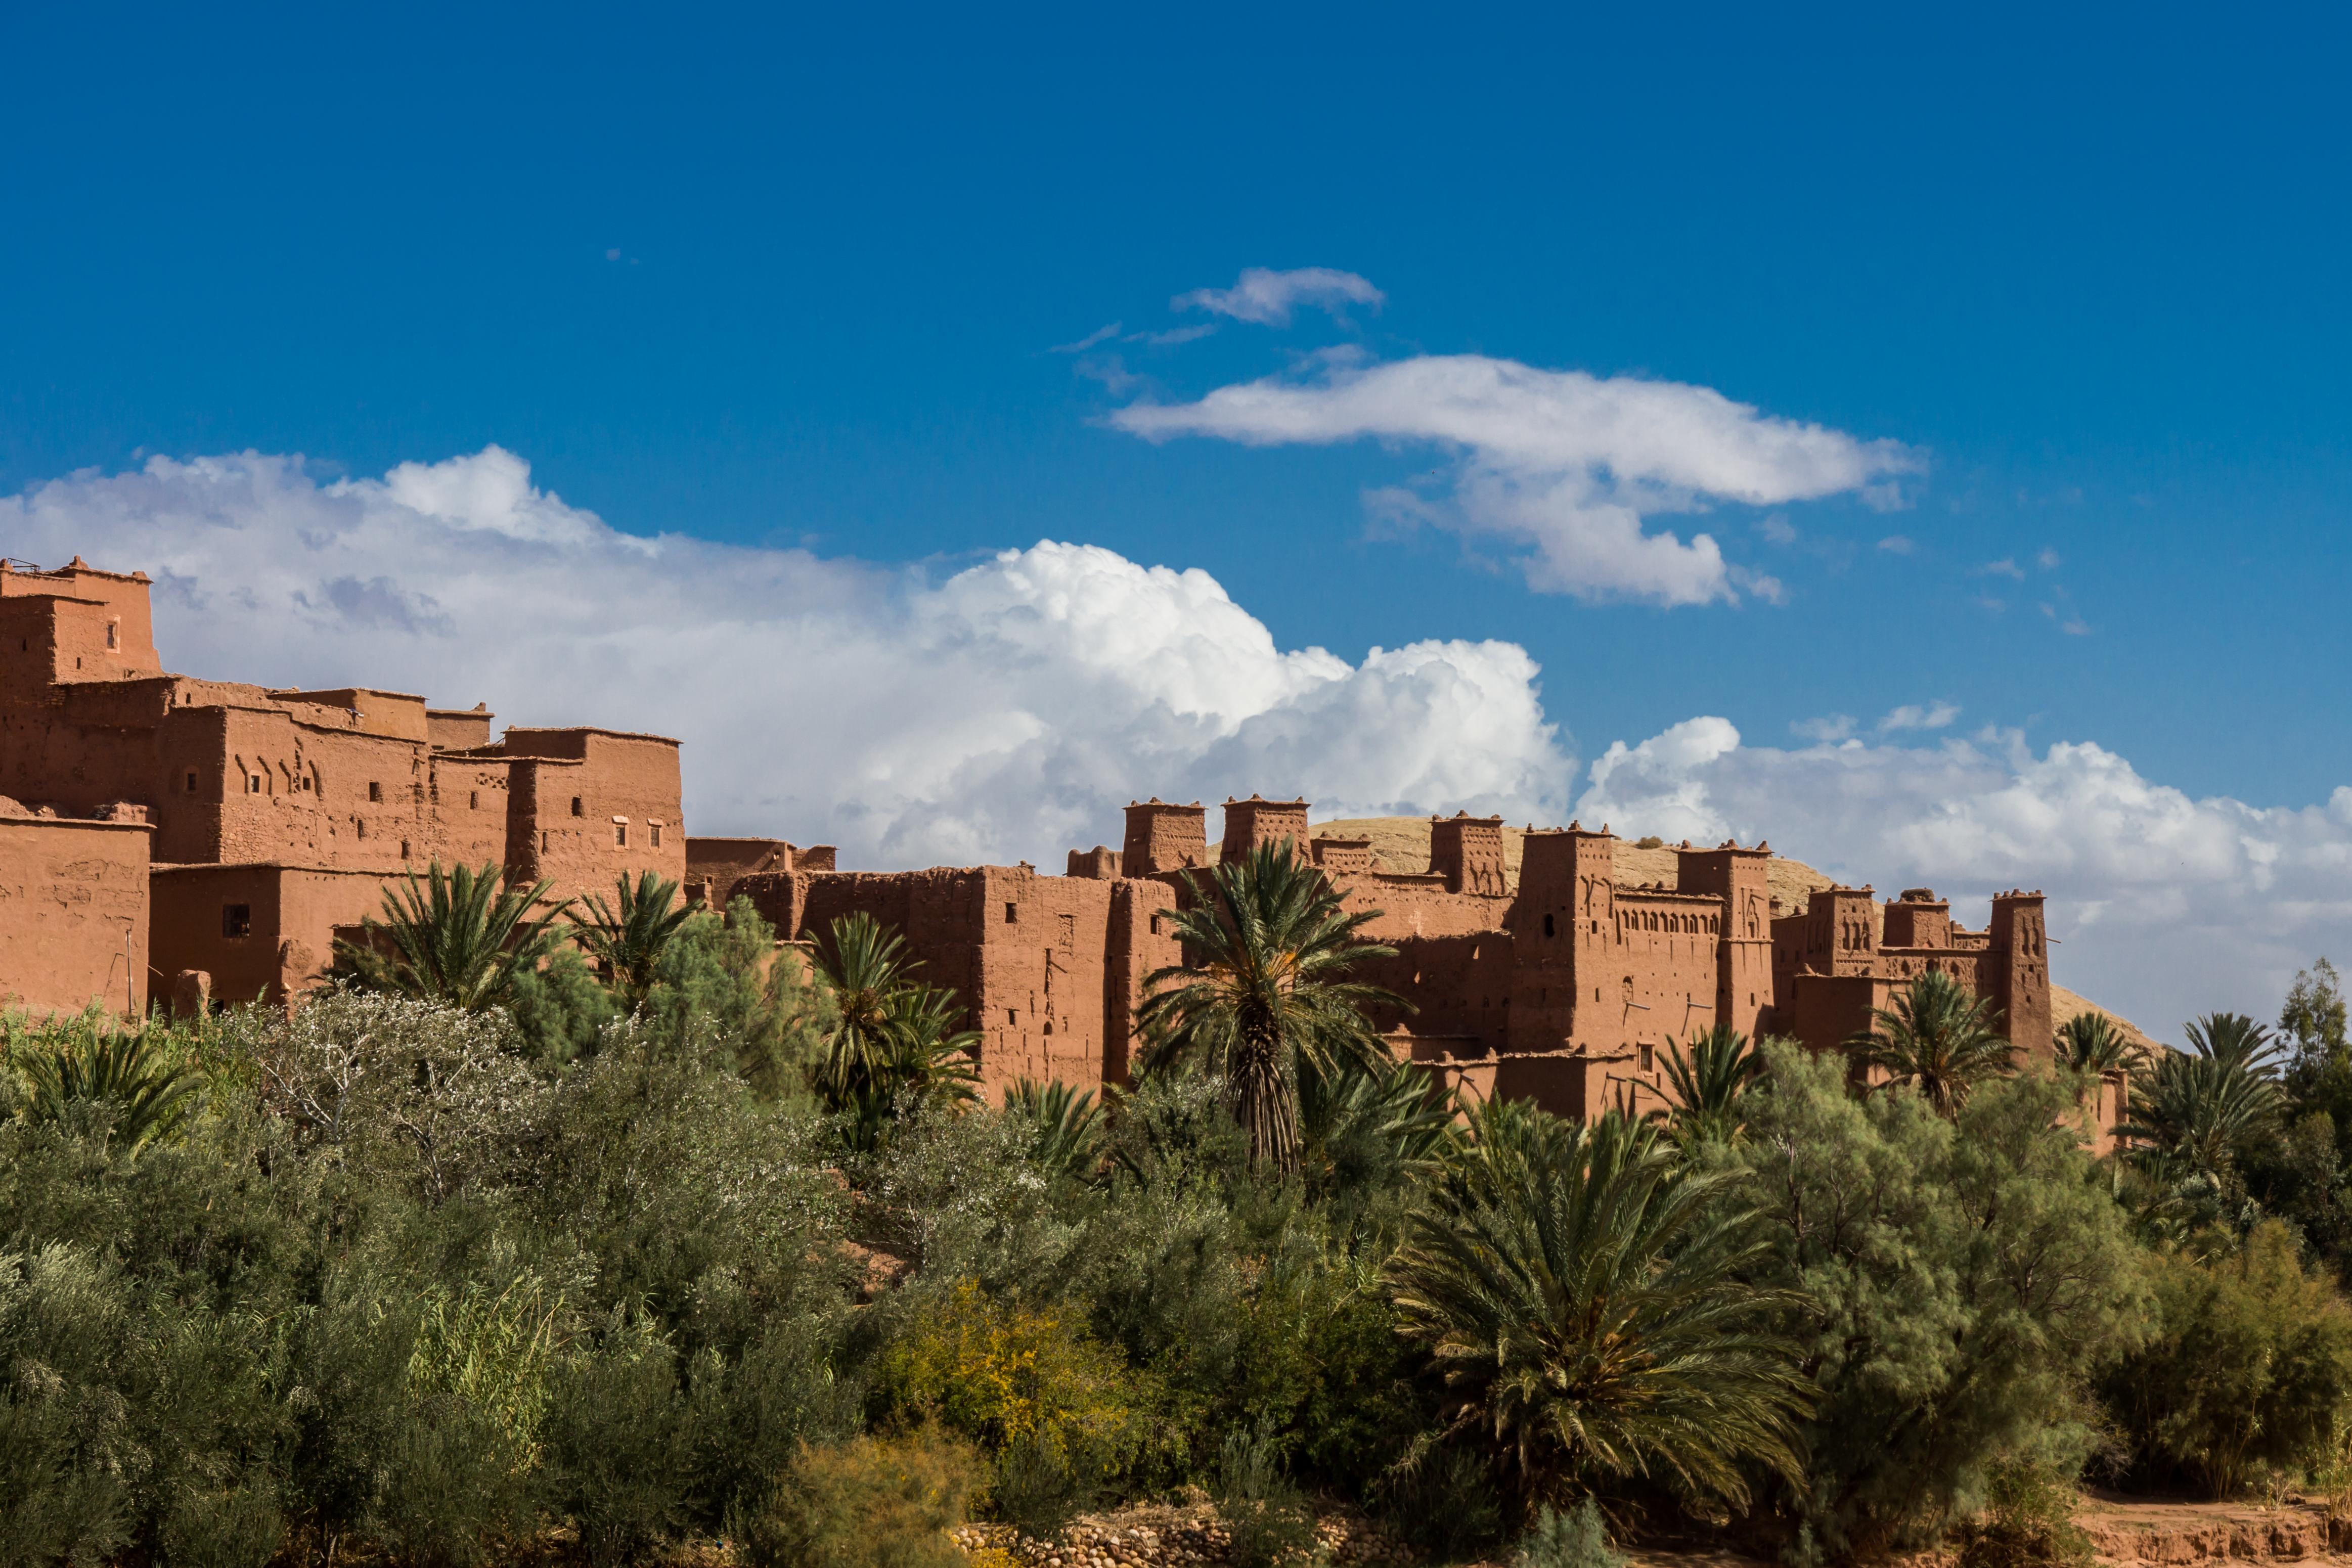 Wallpapers Morocco Wallpapers